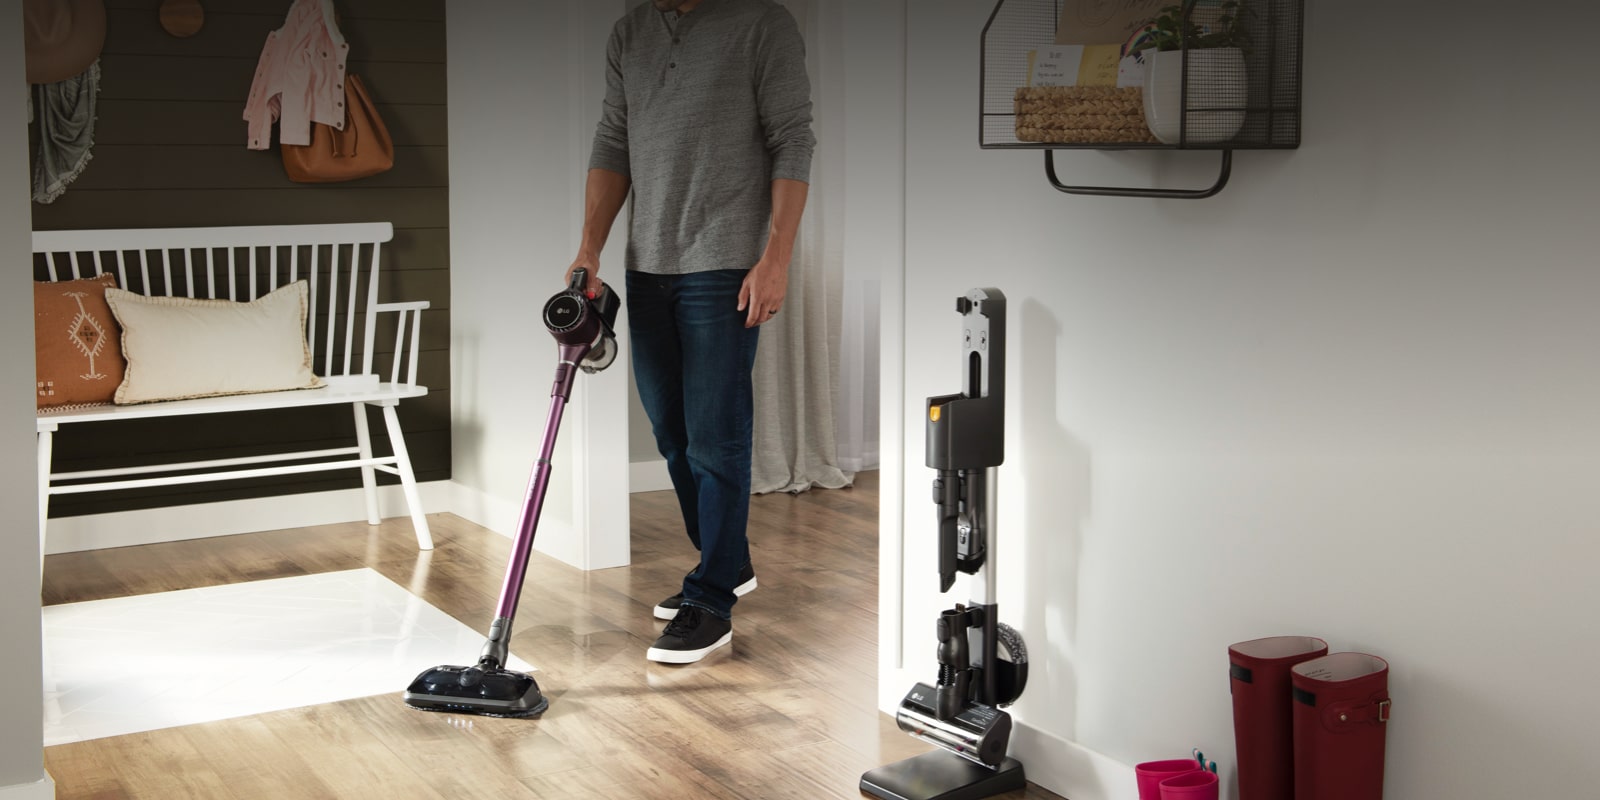 Image of vacuum mop with portable charging stand in home setting